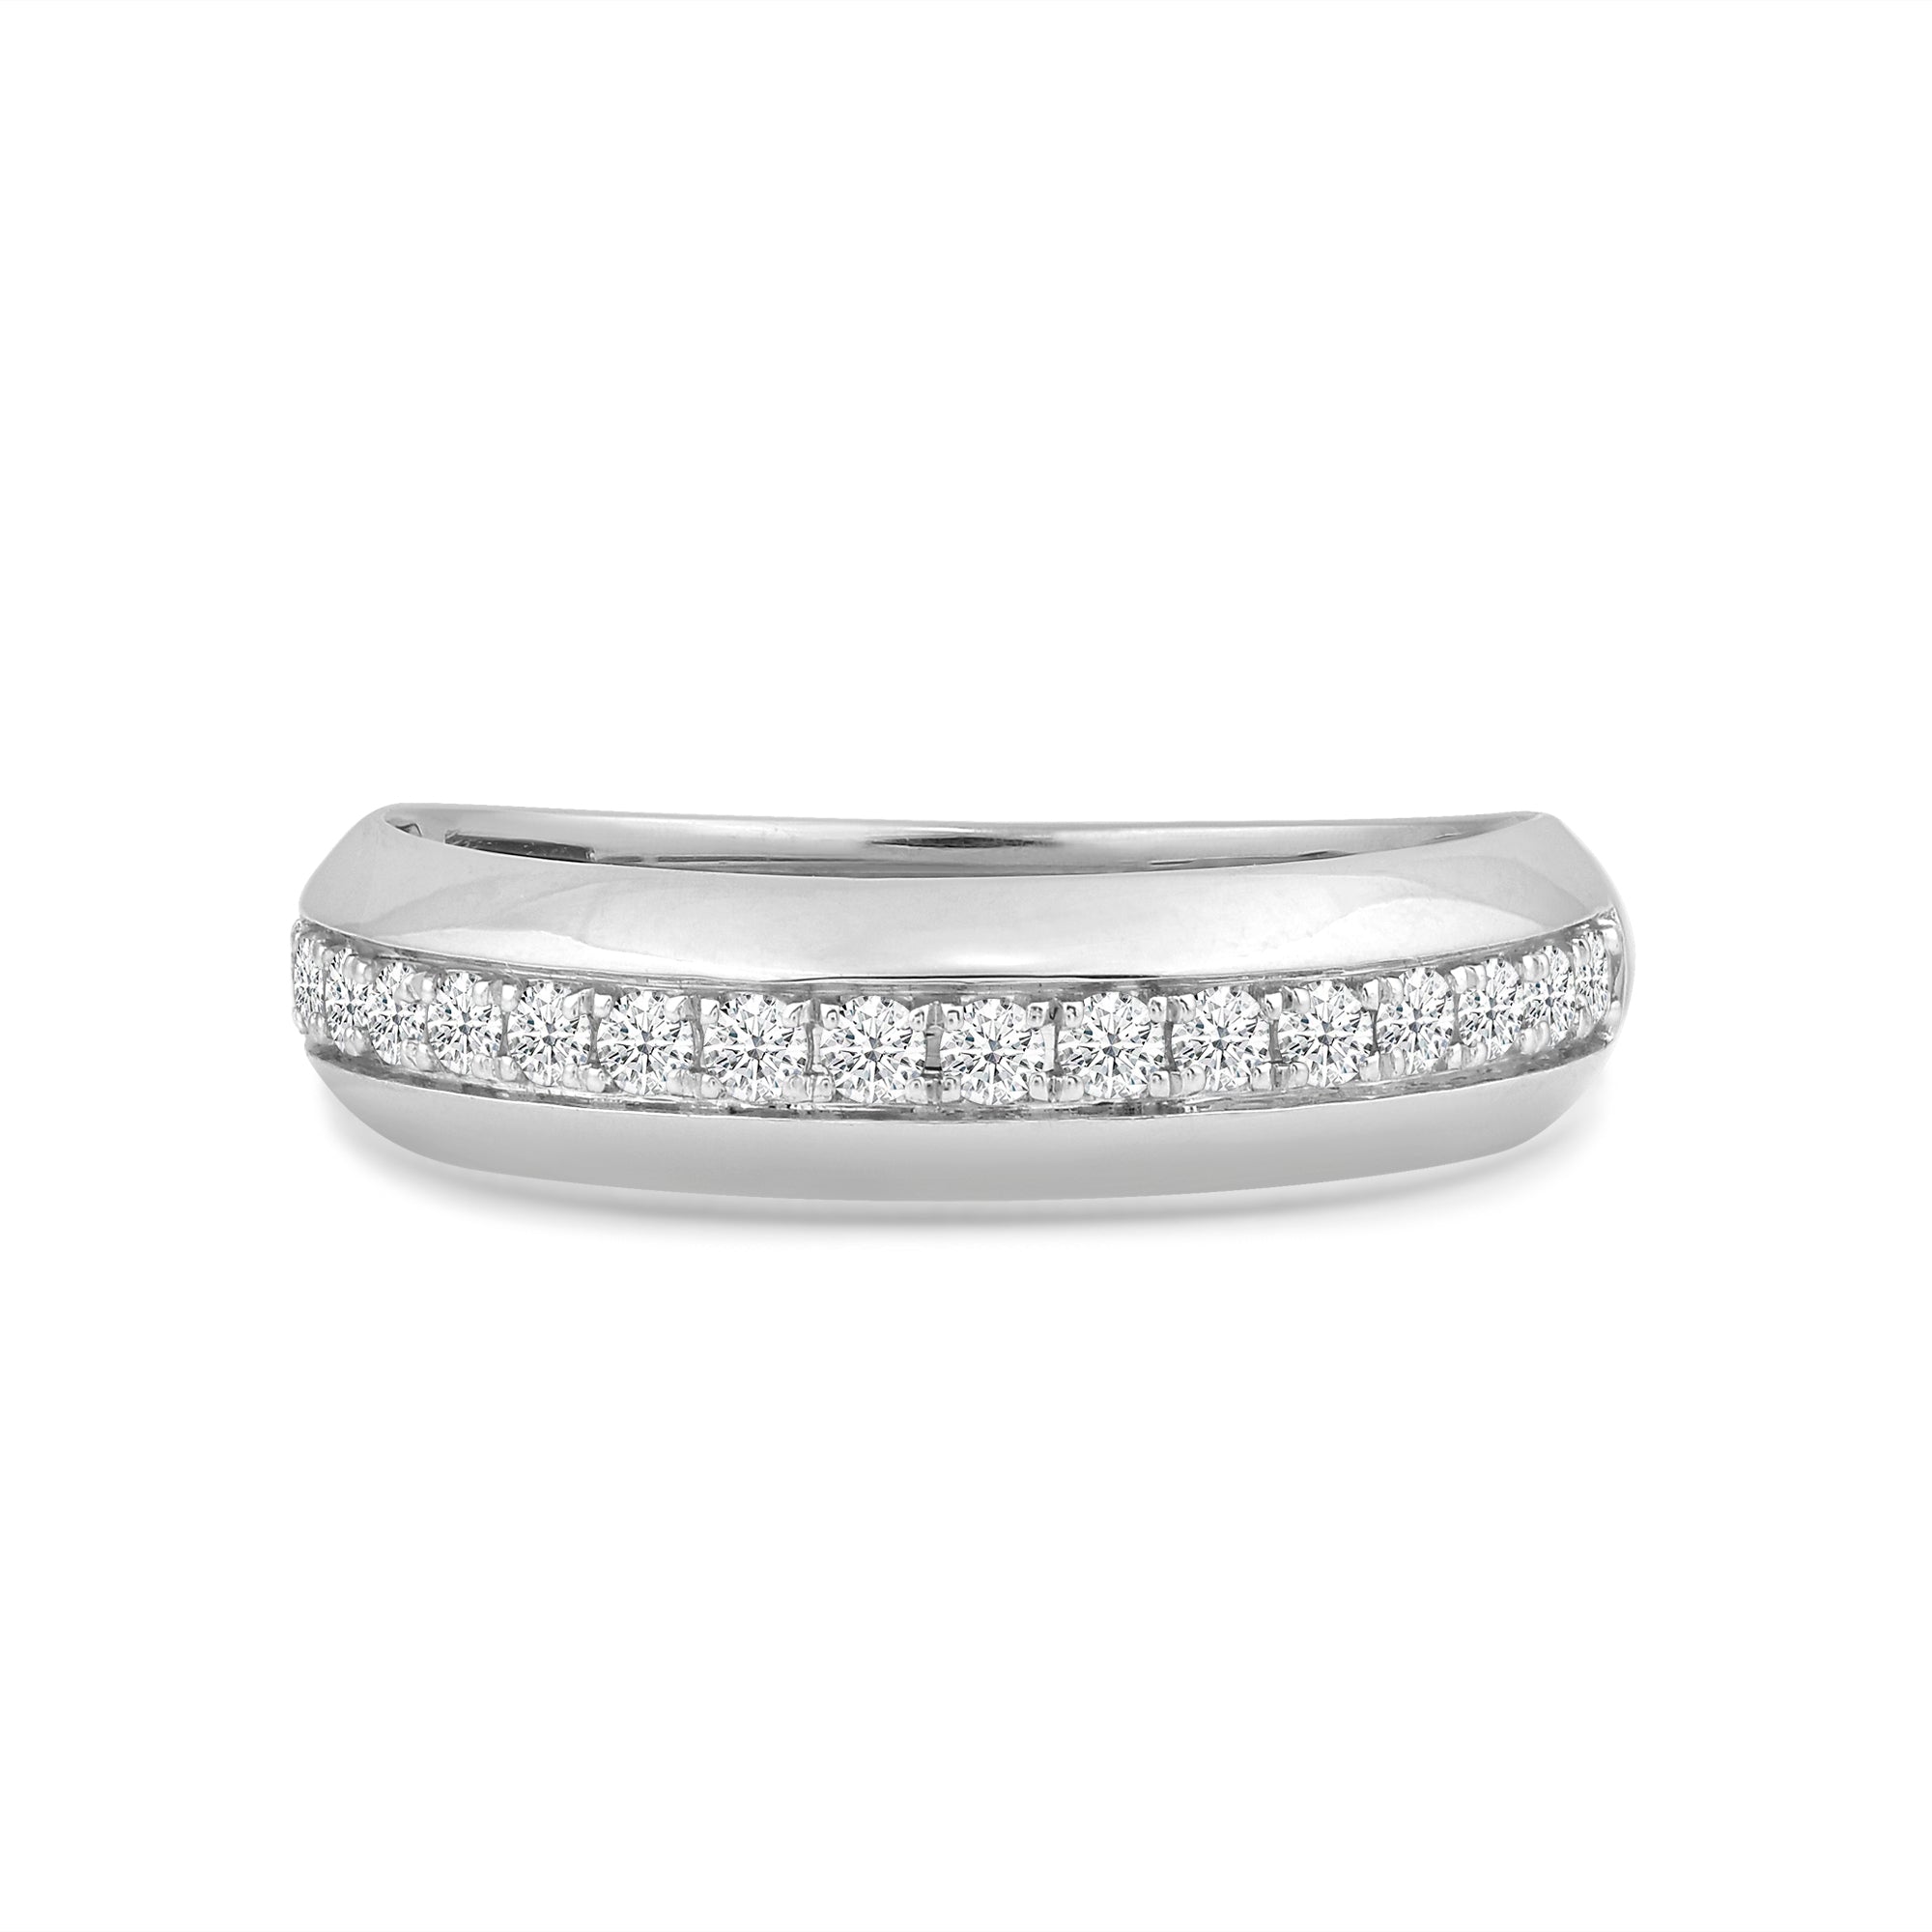 Studded Bevel Edge Diamond Ring – With Clarity